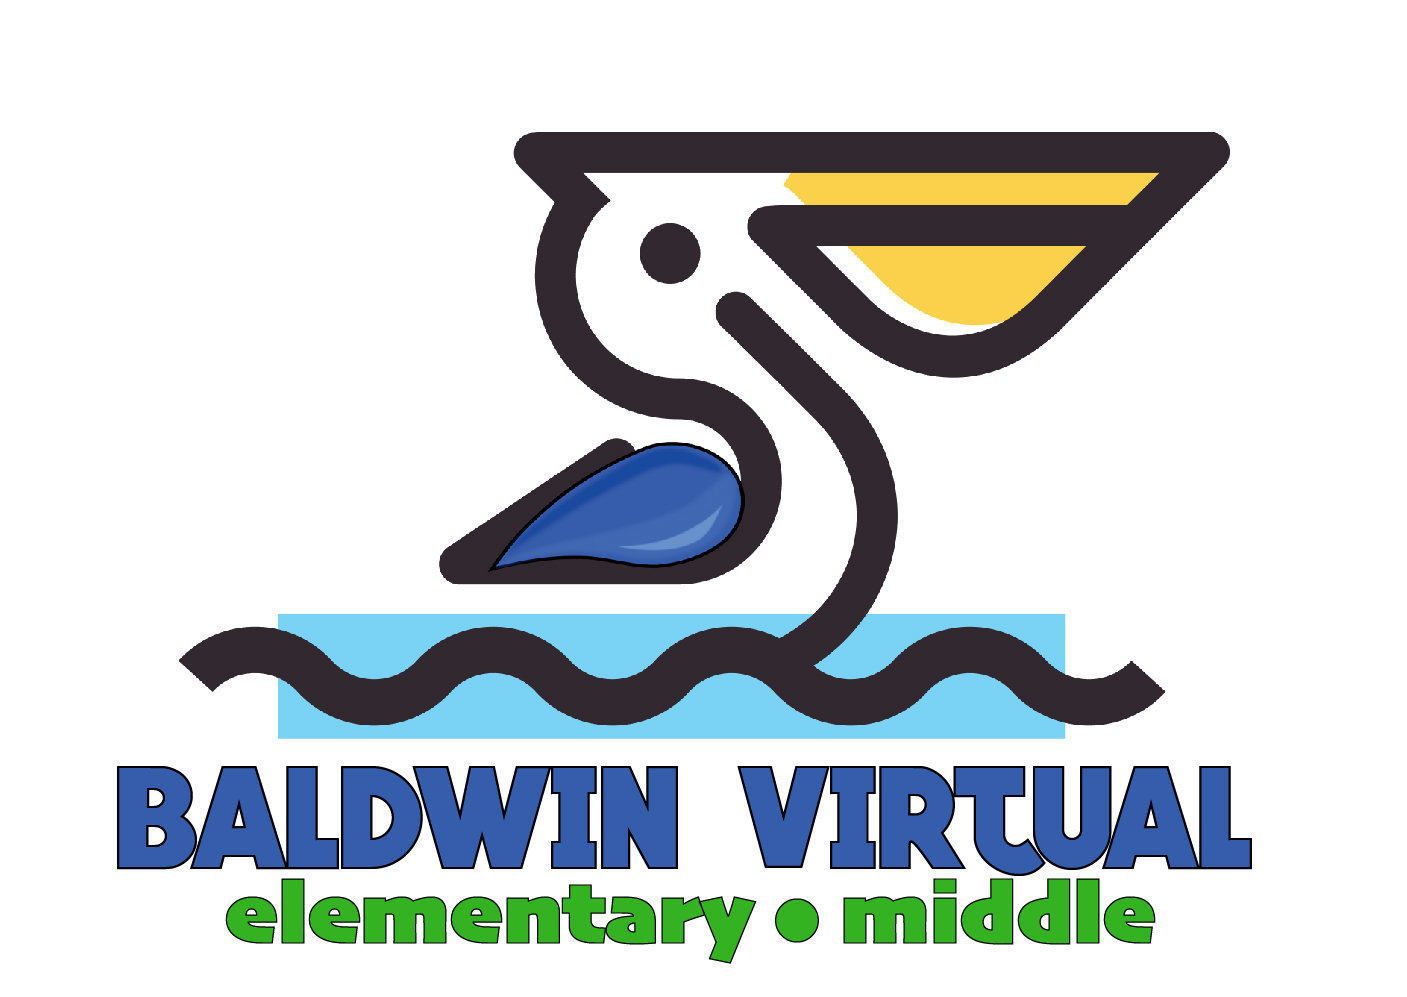 The new logo for the Baldwin County Virtual Elementary/Middle School has been designed to correspond with the school’s expansion efforts.